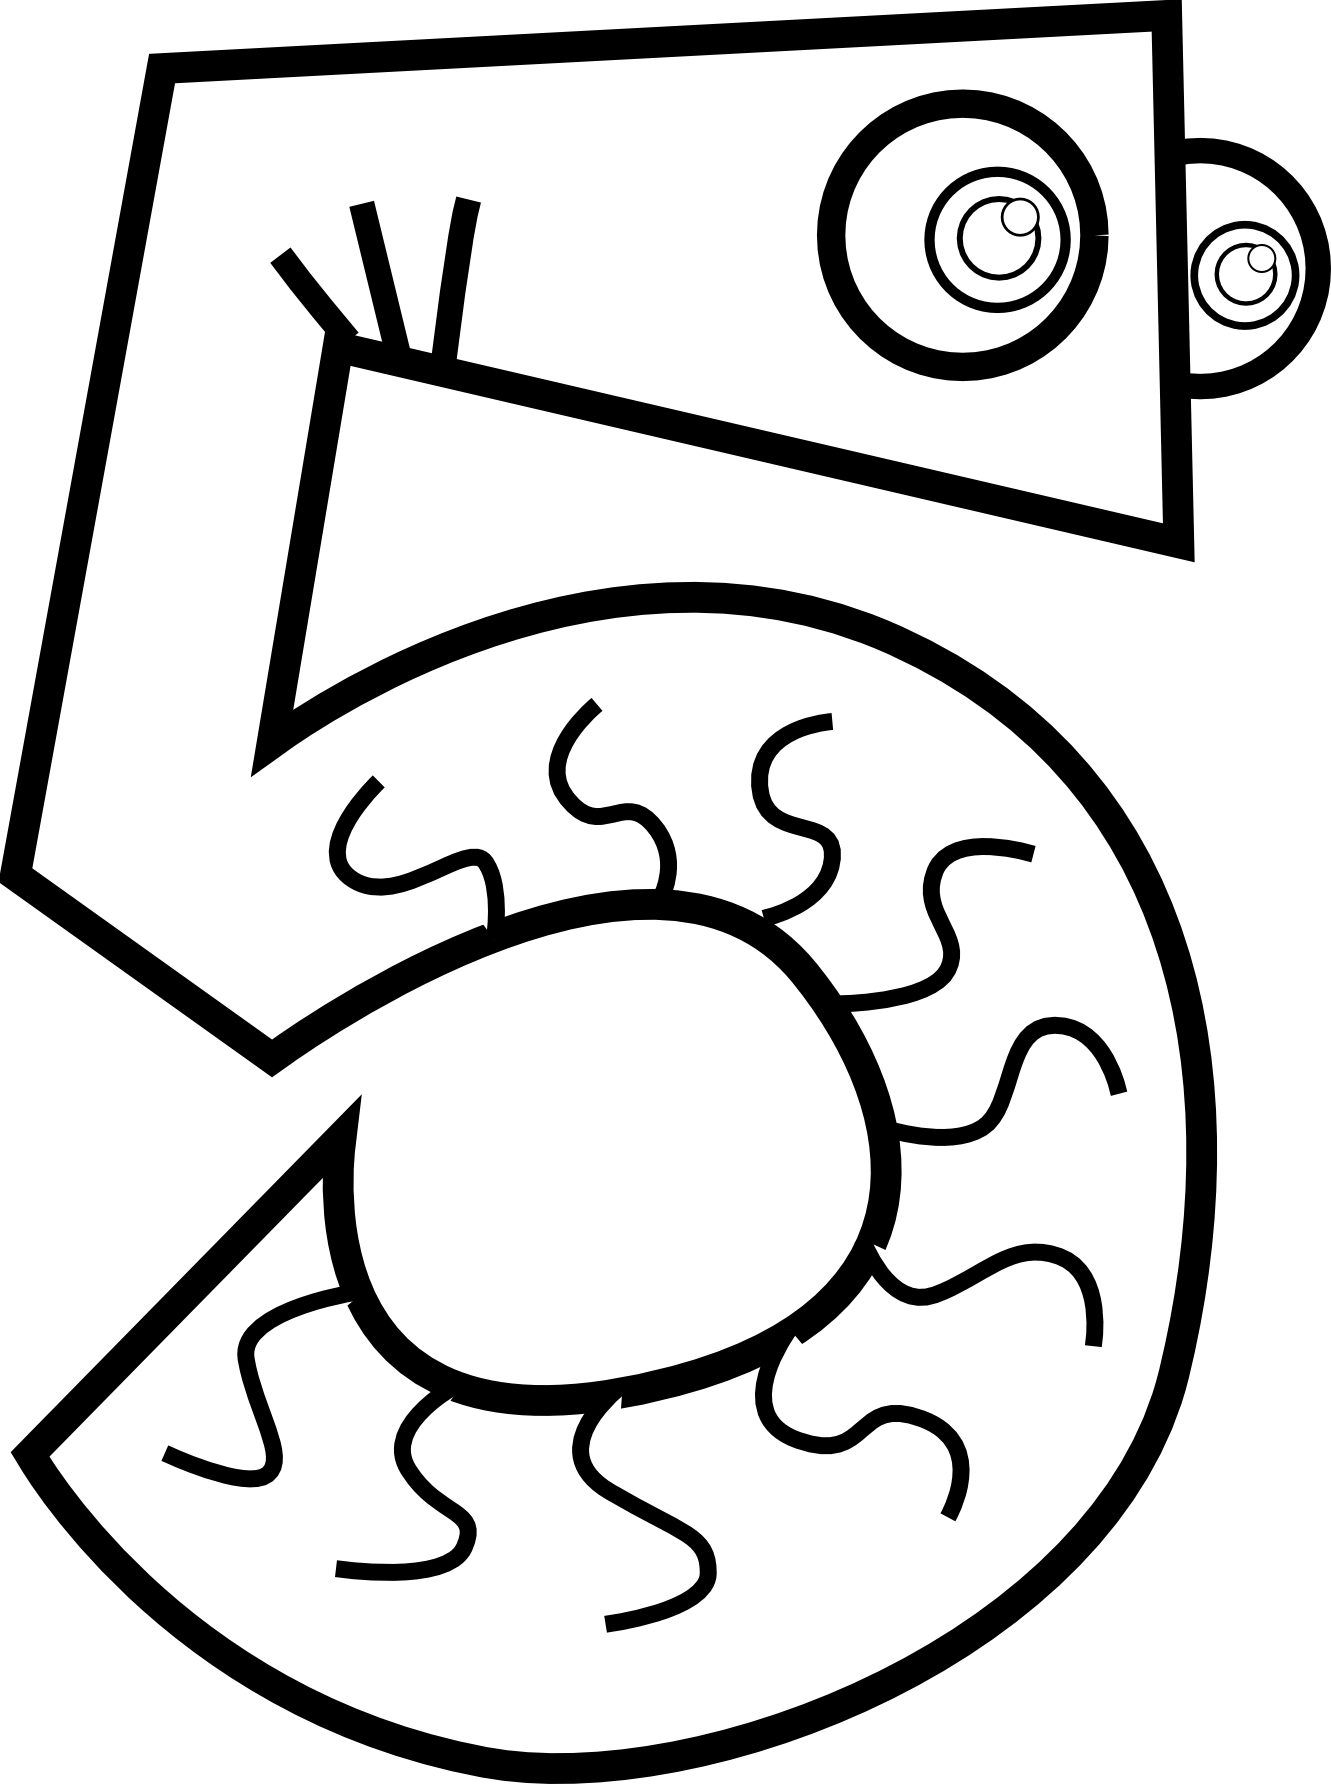 numbers clipart black and white - photo #3